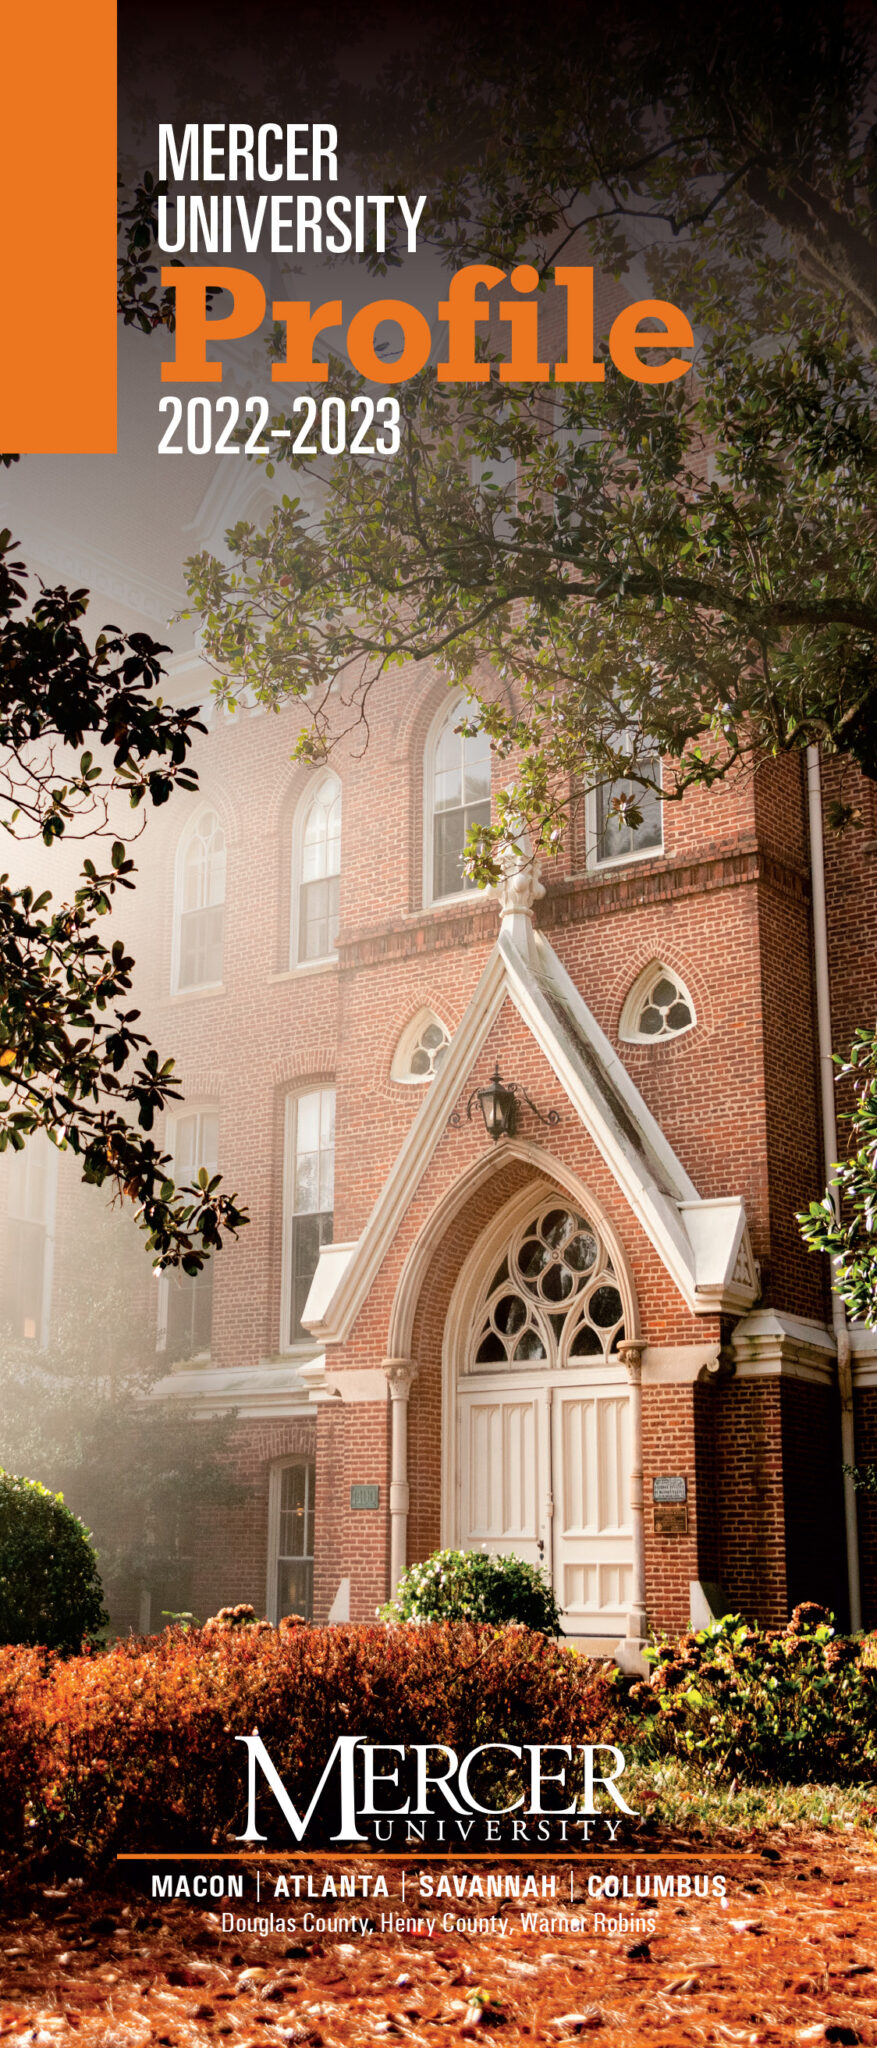 the cover of the mercer profile shows the front of the administration building cloaked in fog. text reads mercer university profile 2022-2023